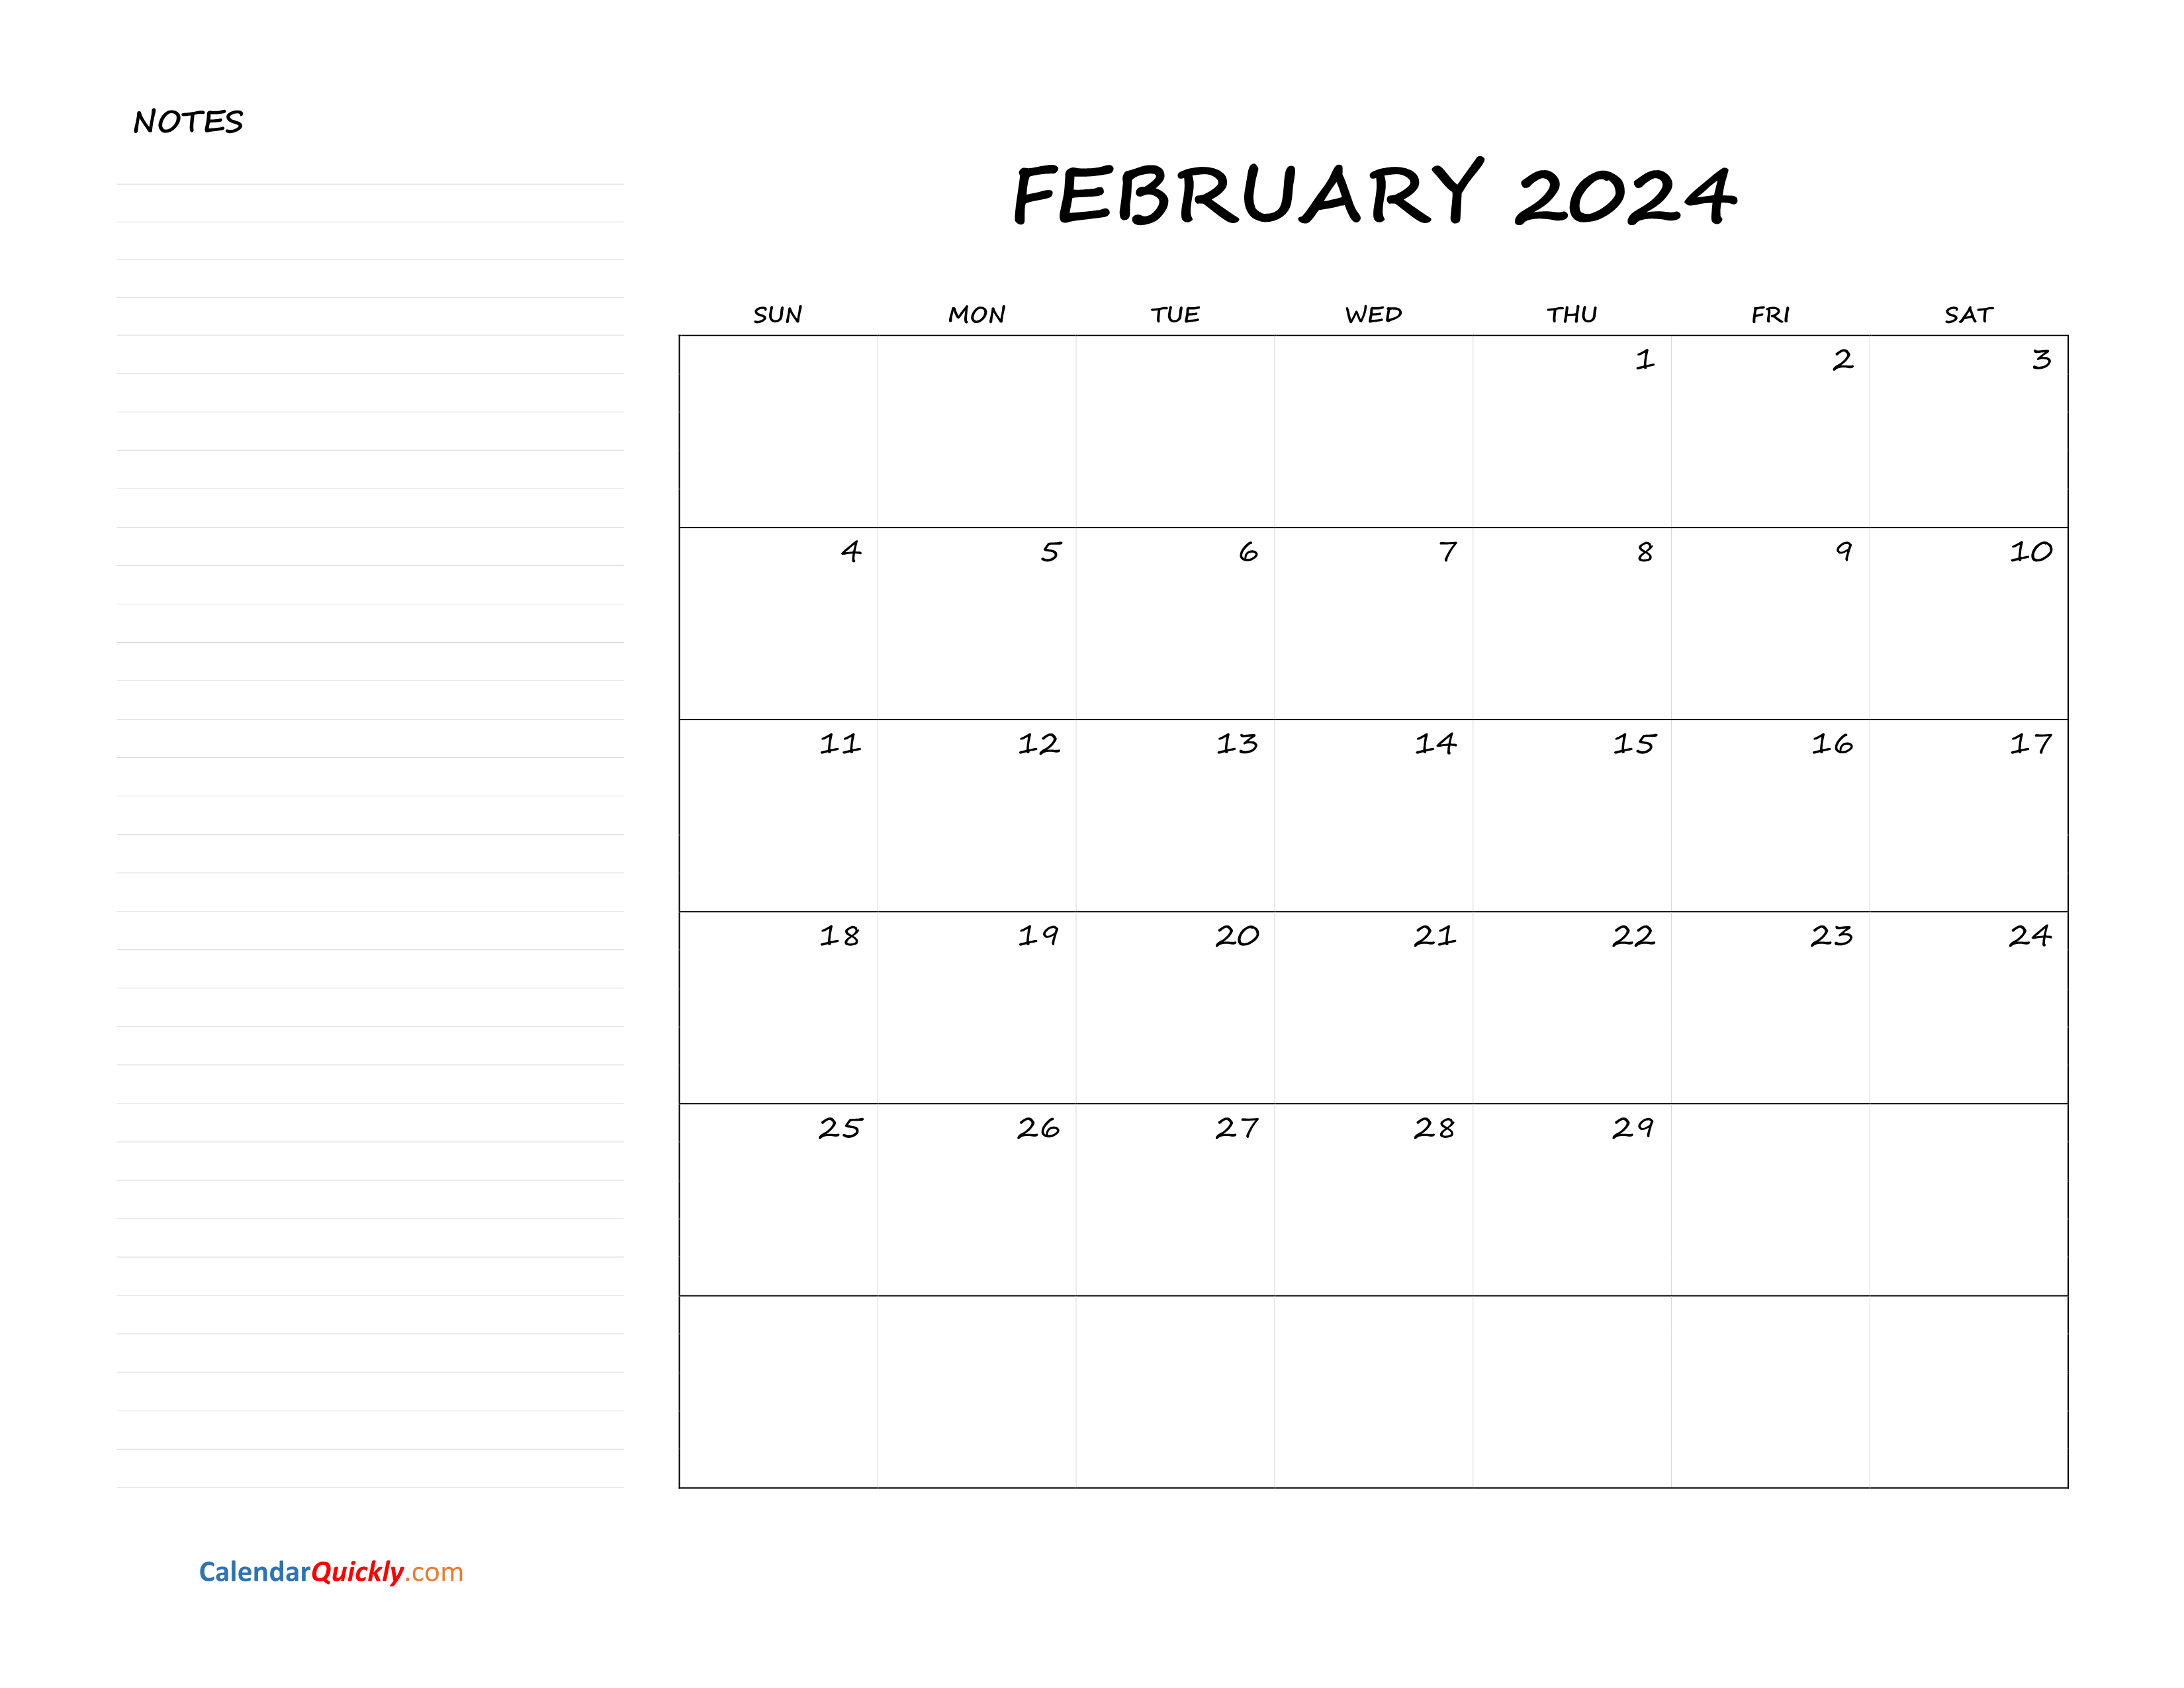 Add Reminders And Notes To My February 2024 Calendar Images And Quotes